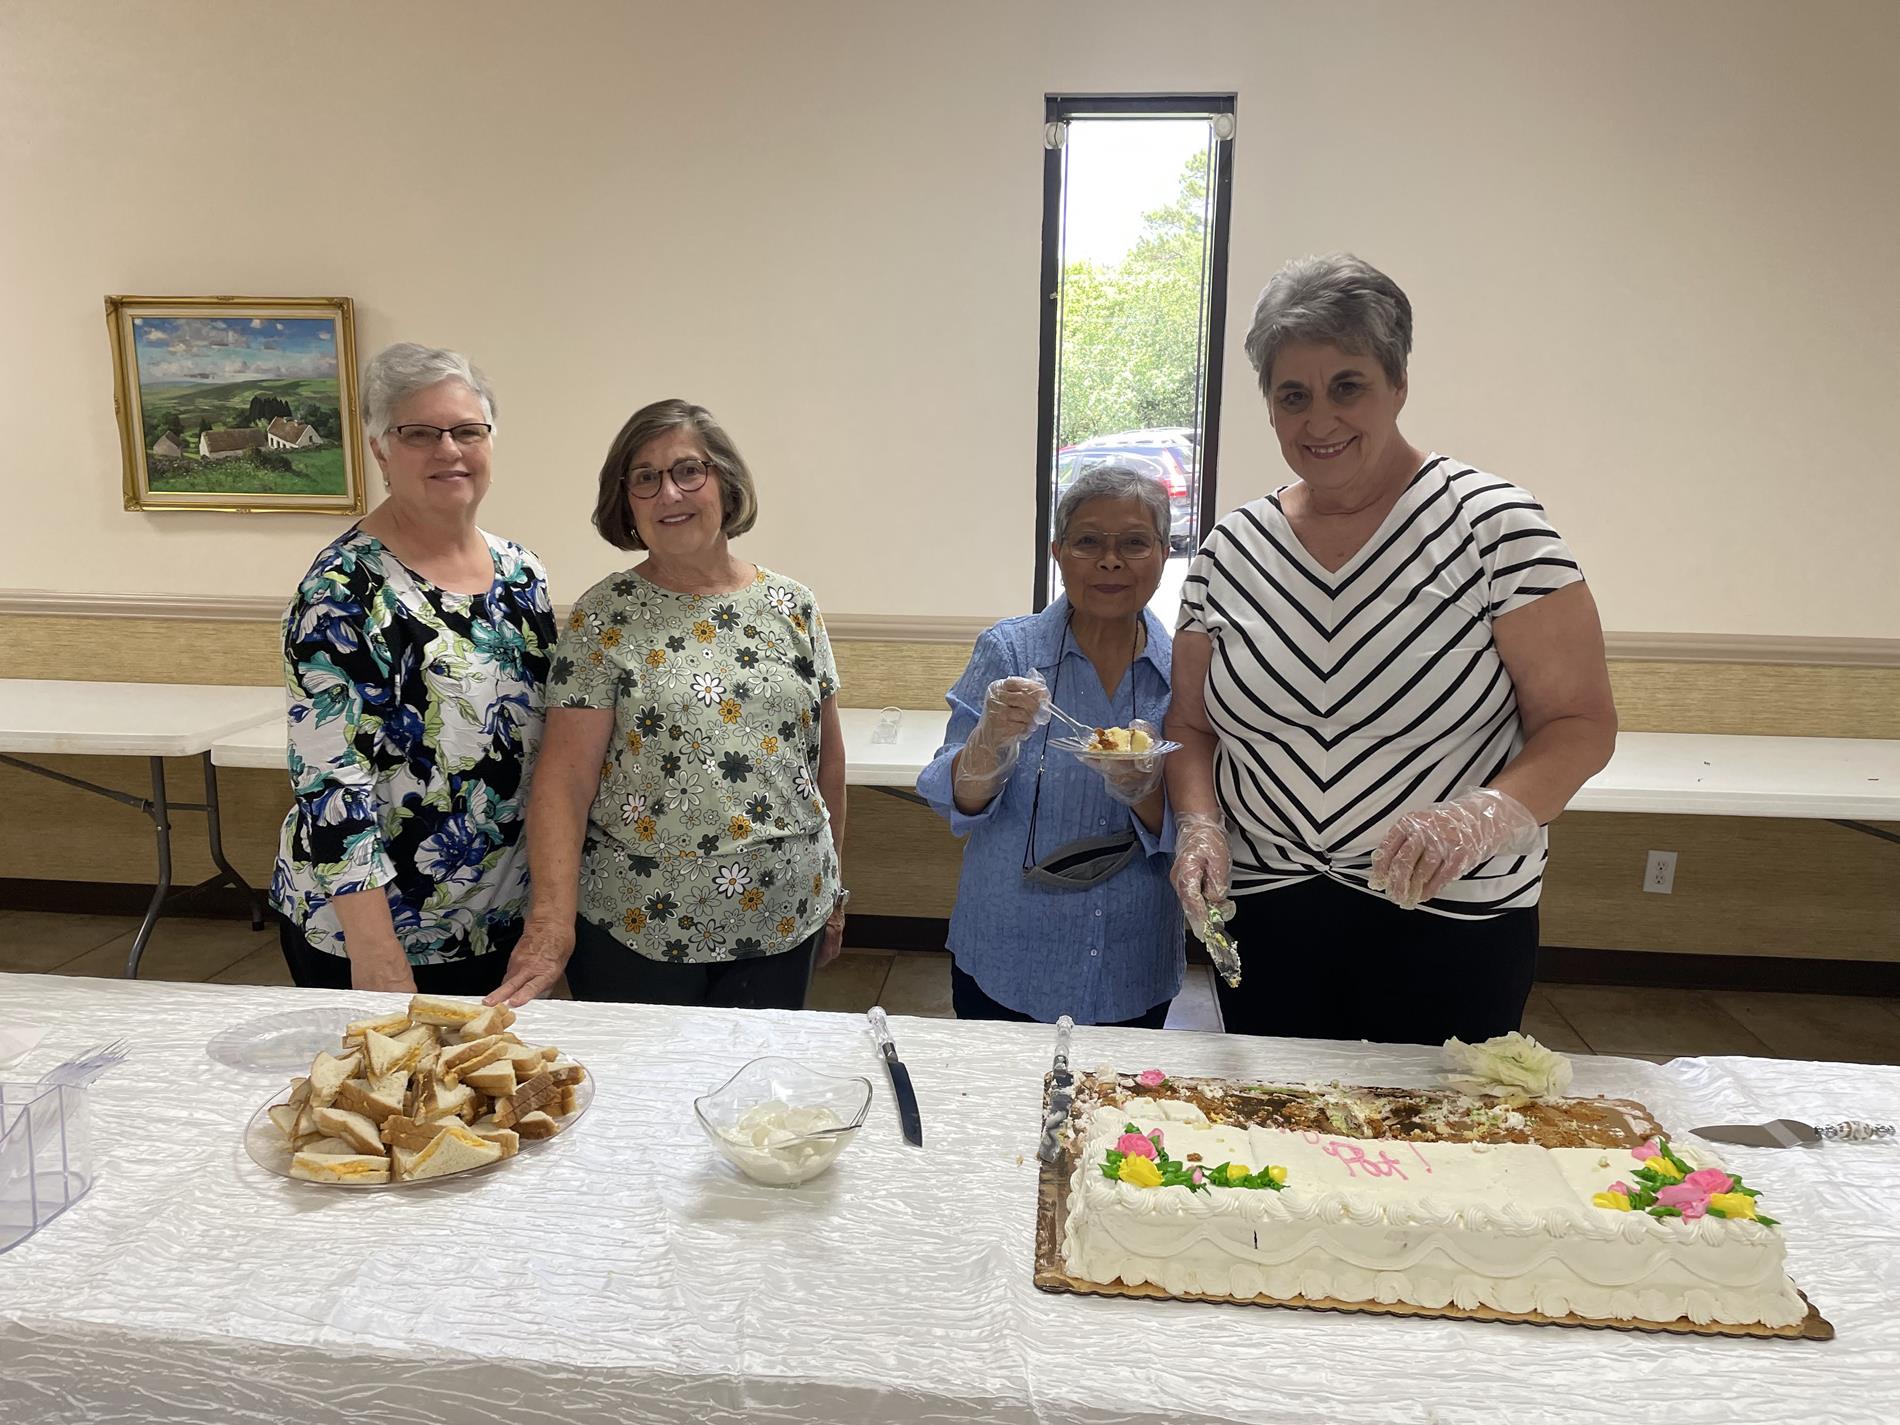 Some of the Ladies Auxiliary who served at the reception